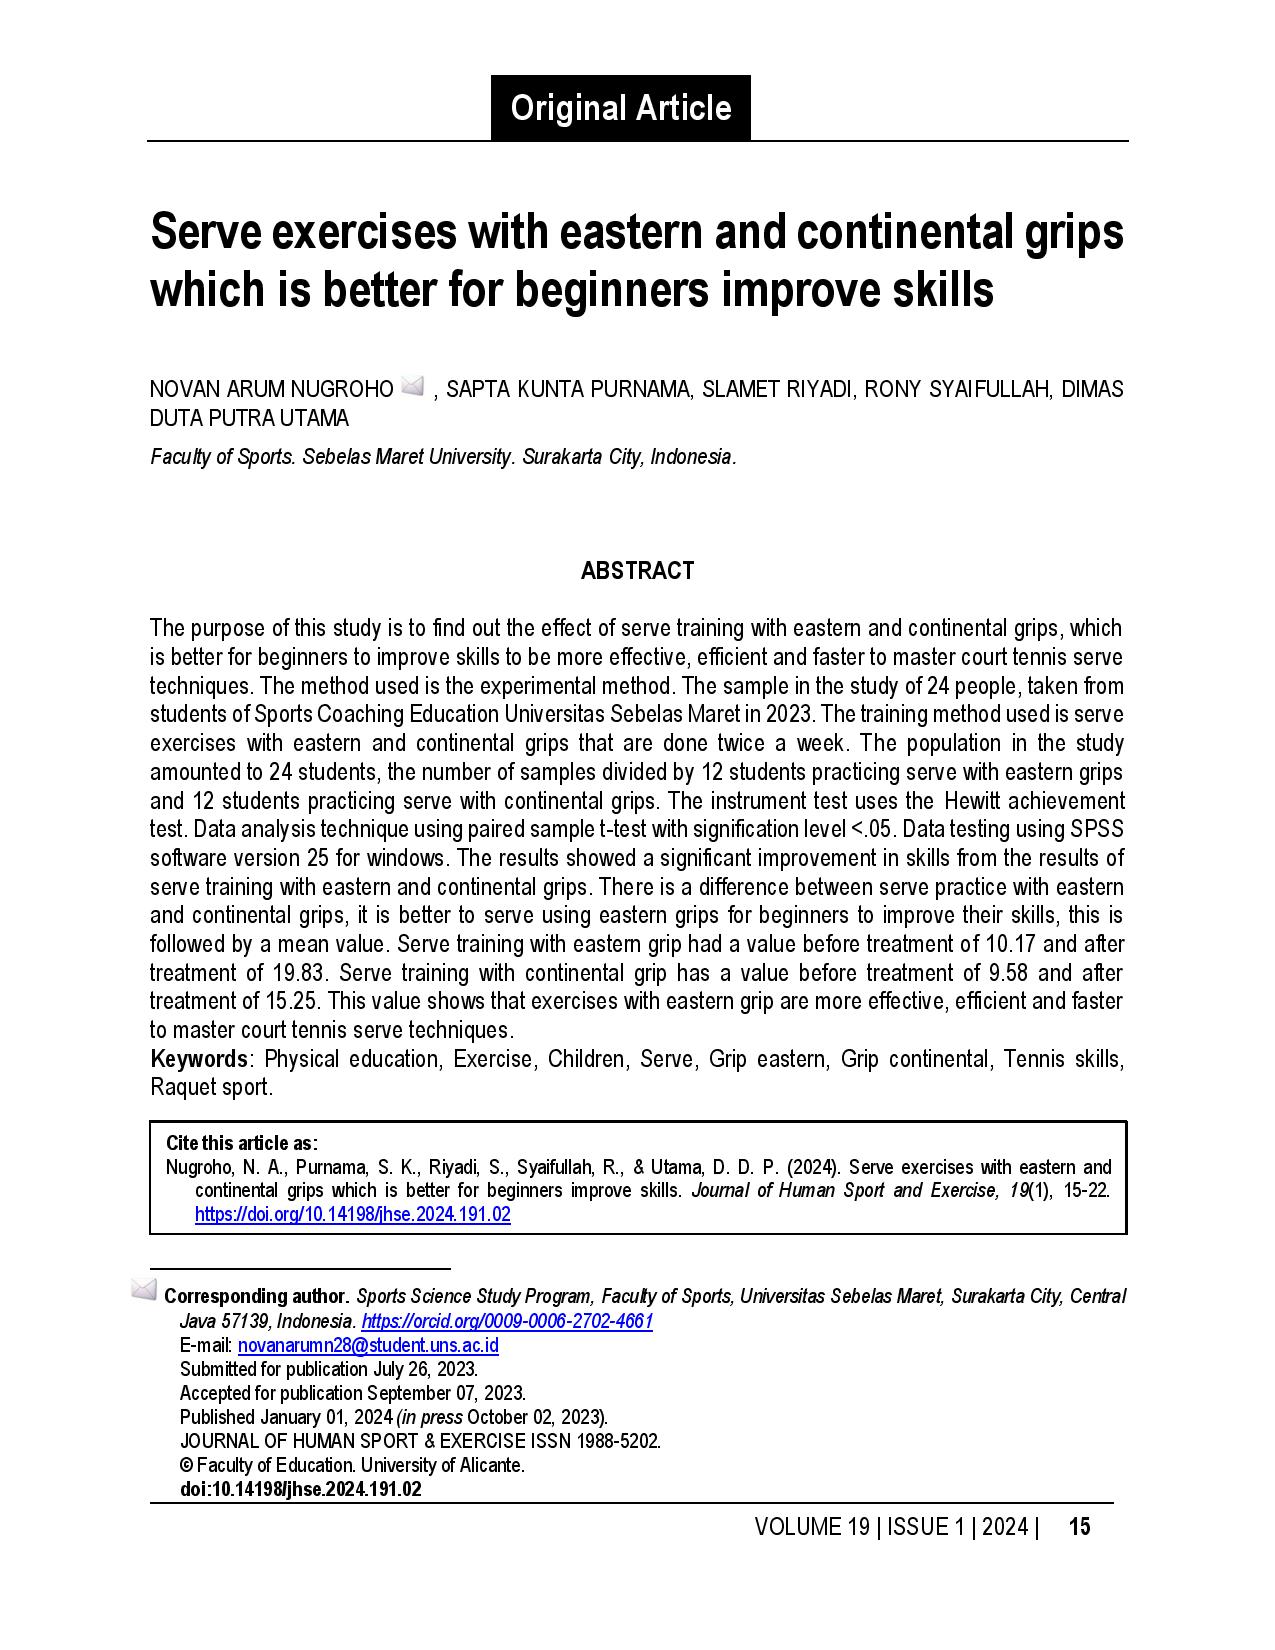 Serve exercises with eastern and continental grips which is better for beginners improve skills